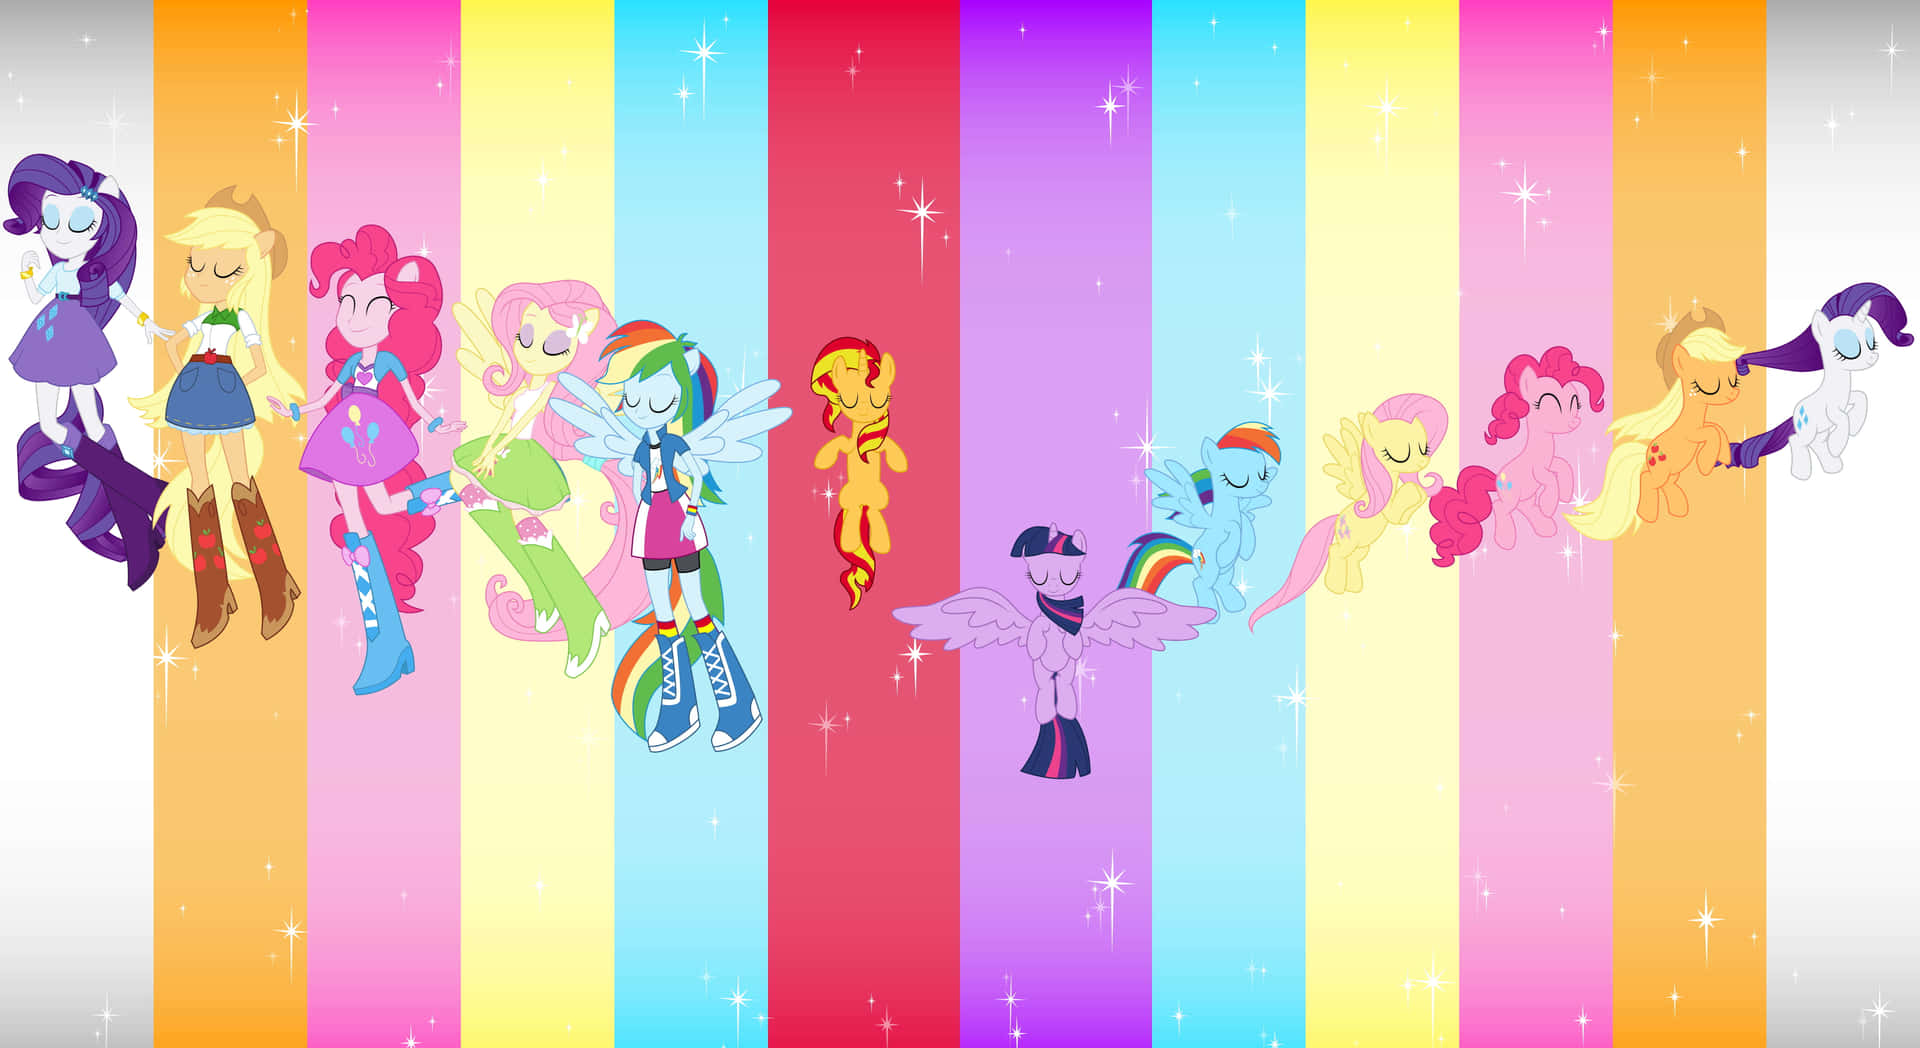 Download Friendship is magic with My Little Pony! | Wallpapers.com